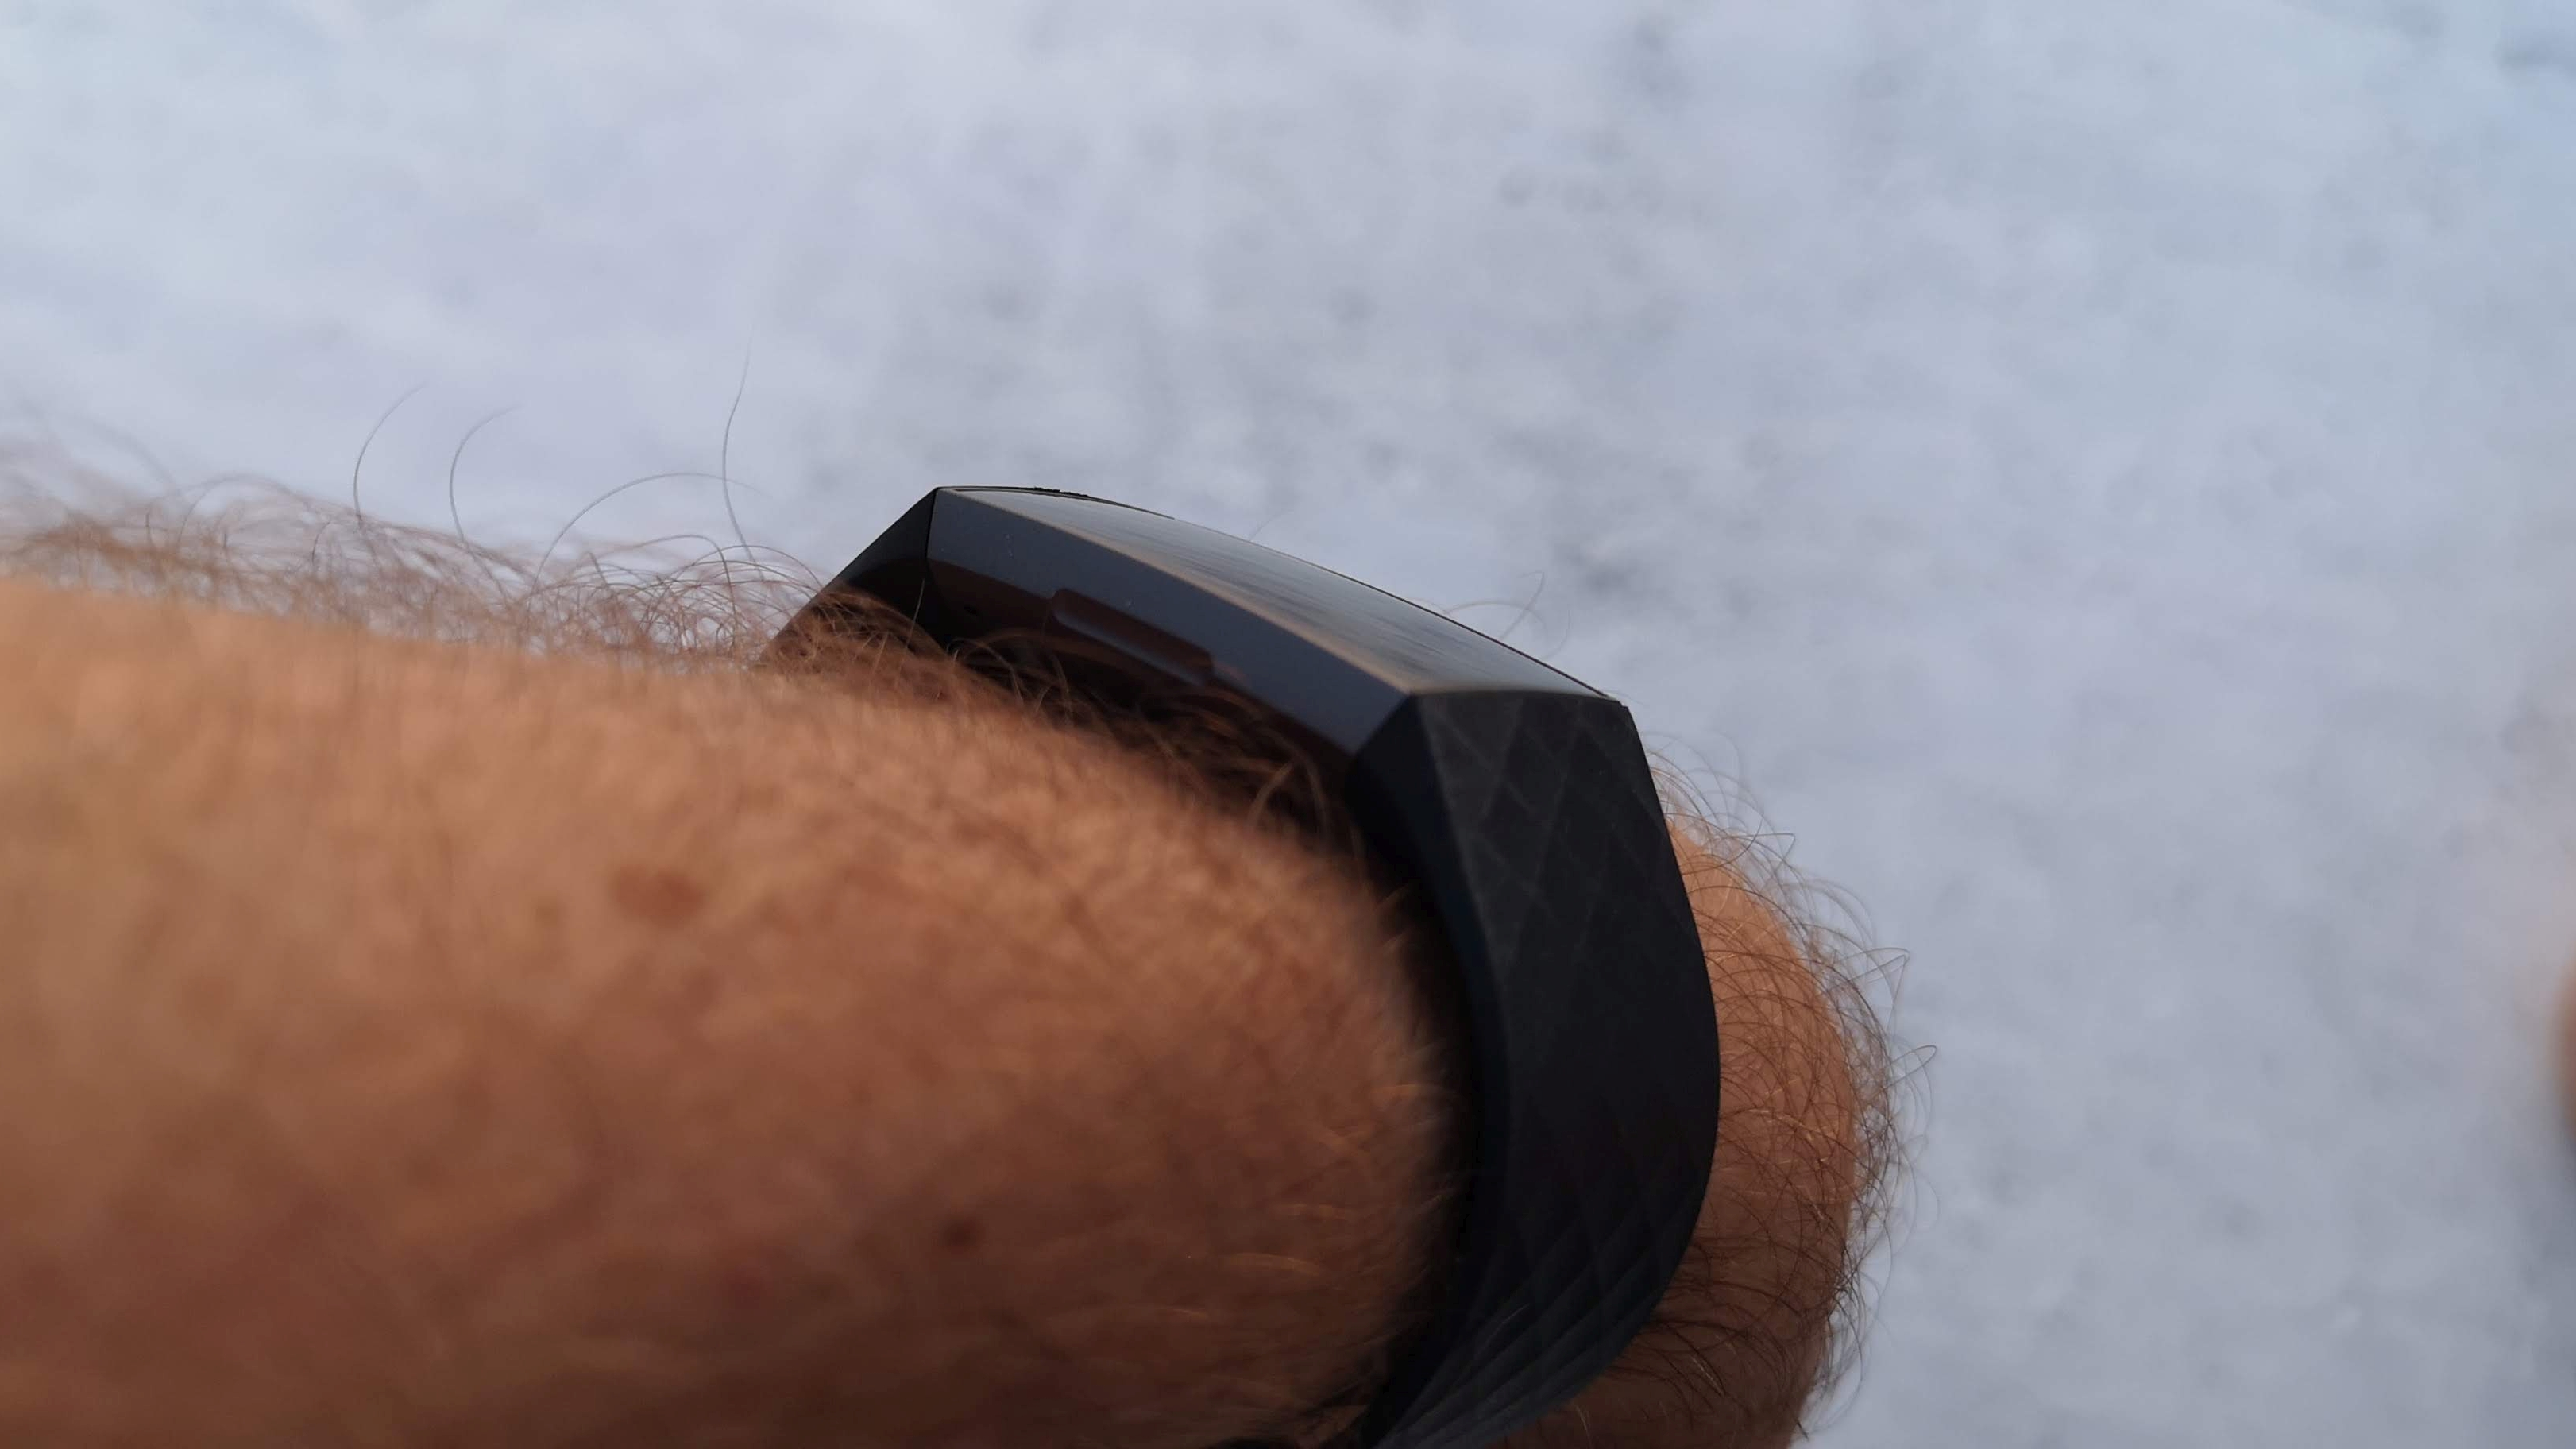 Fitbit haptic button